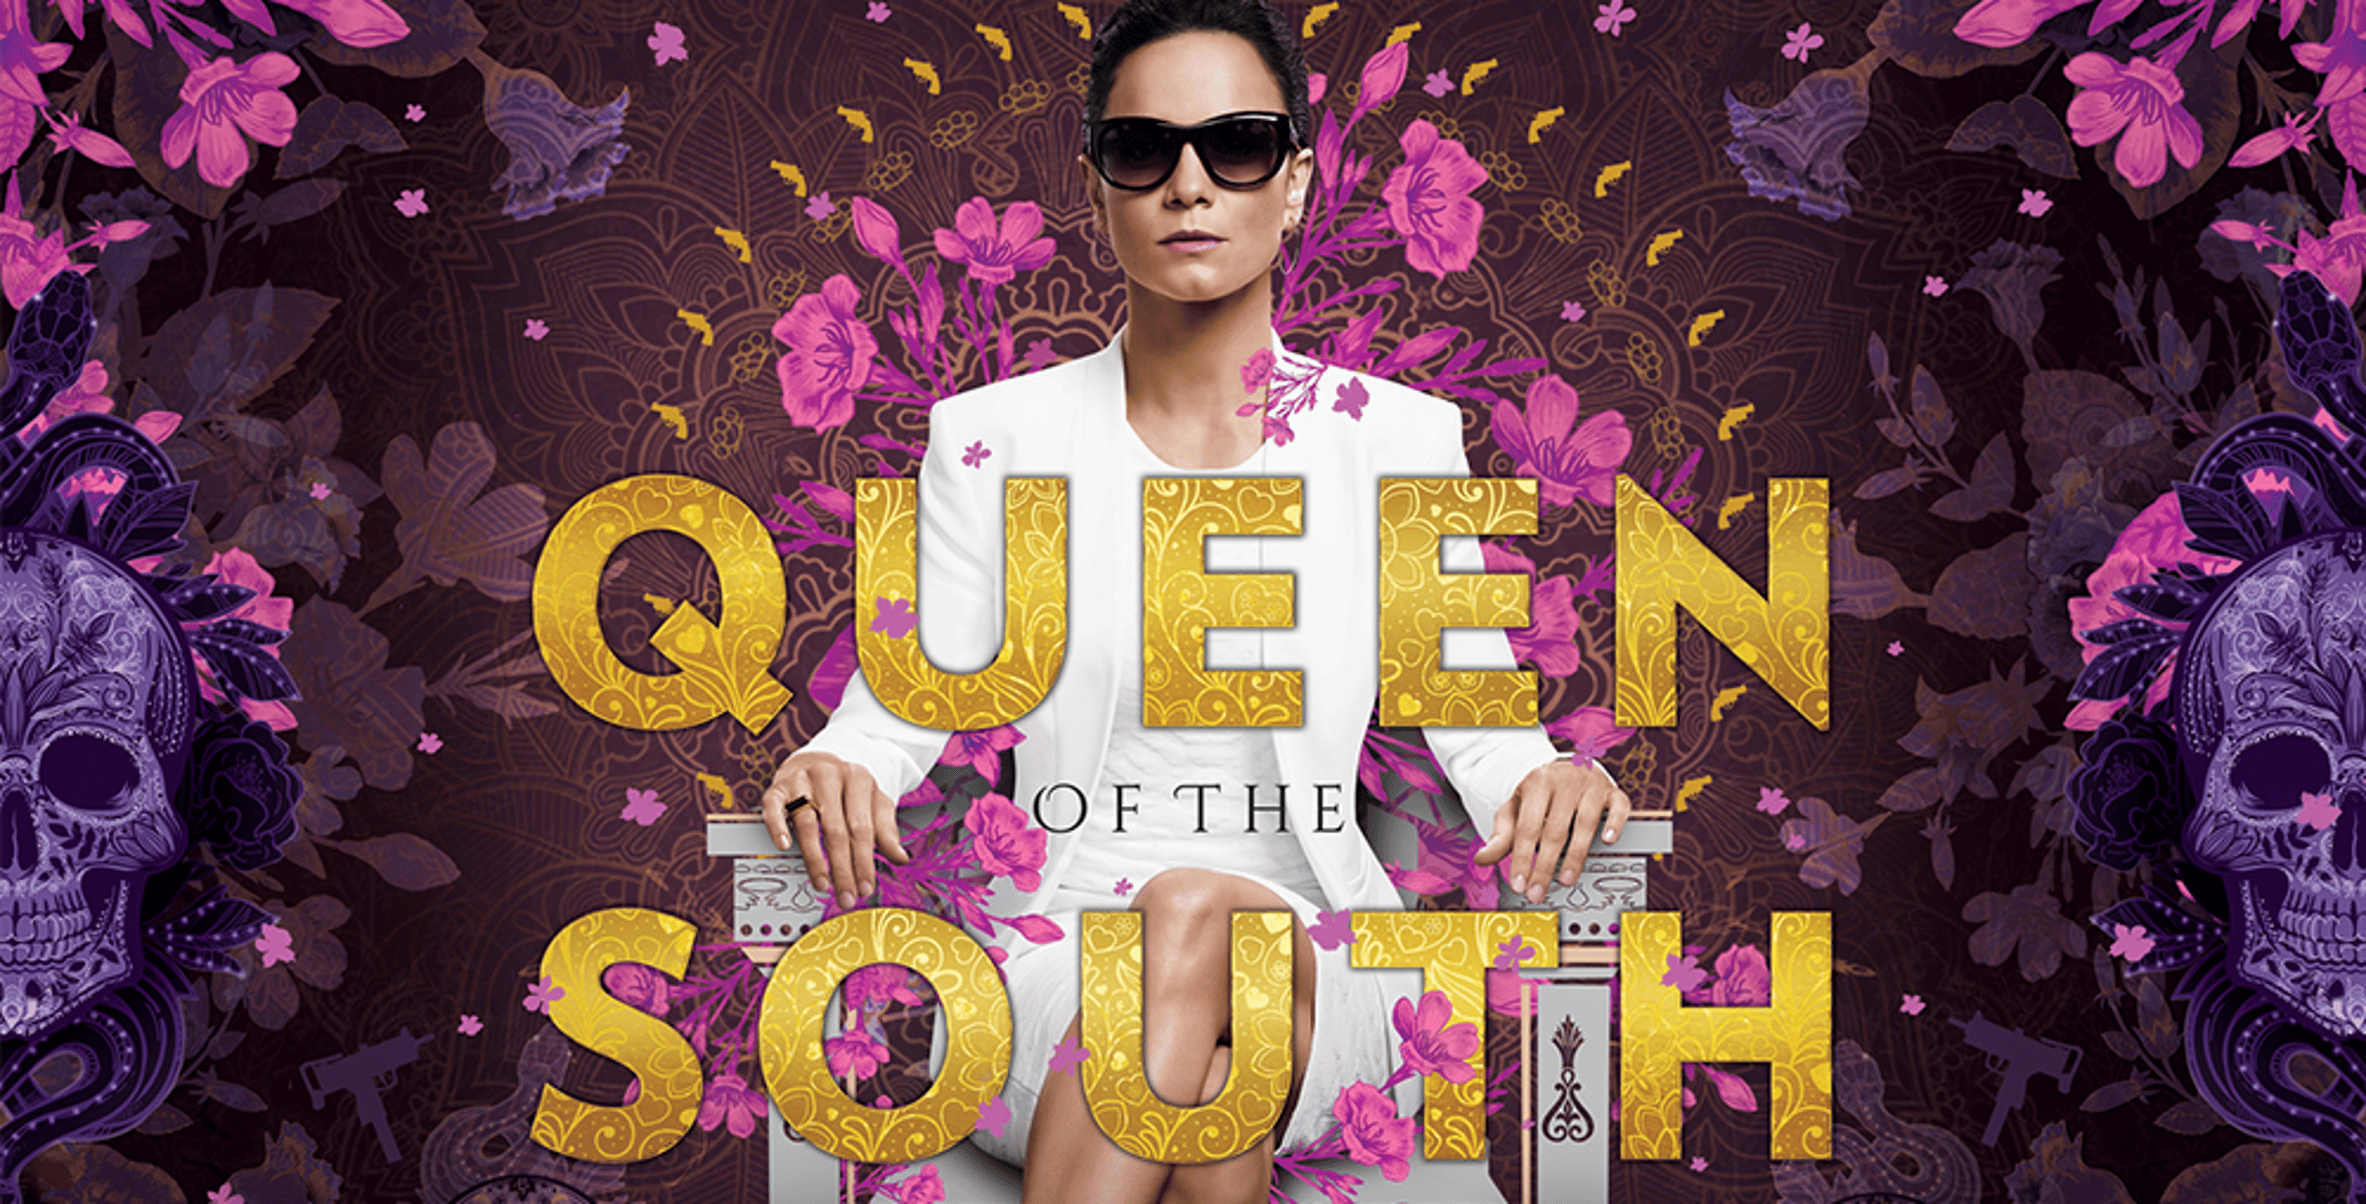 Casting USA Network's Queen of the South!